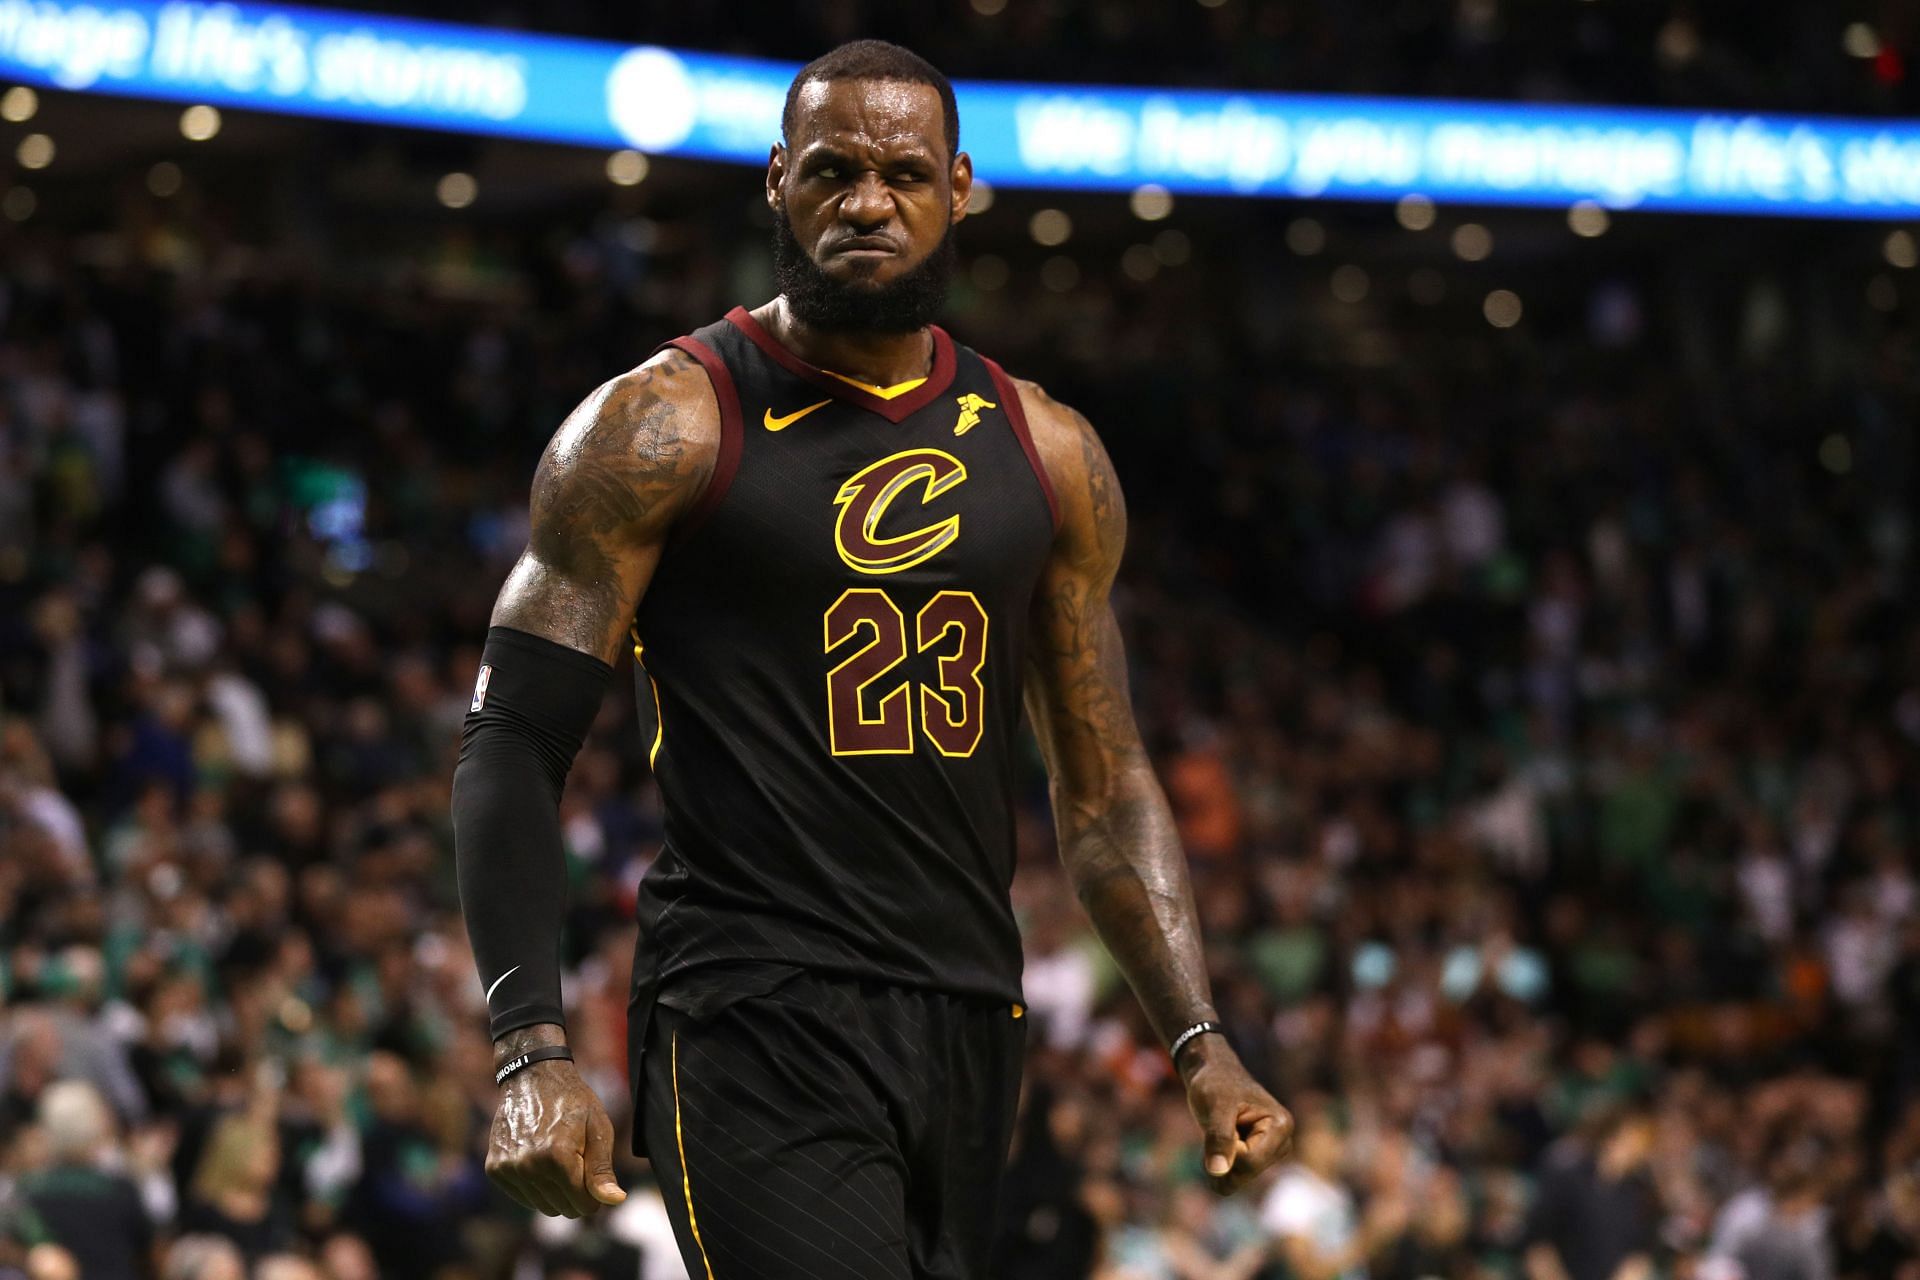 LeBron James against the Boston Celtics during the 2018 NBA Playoffs